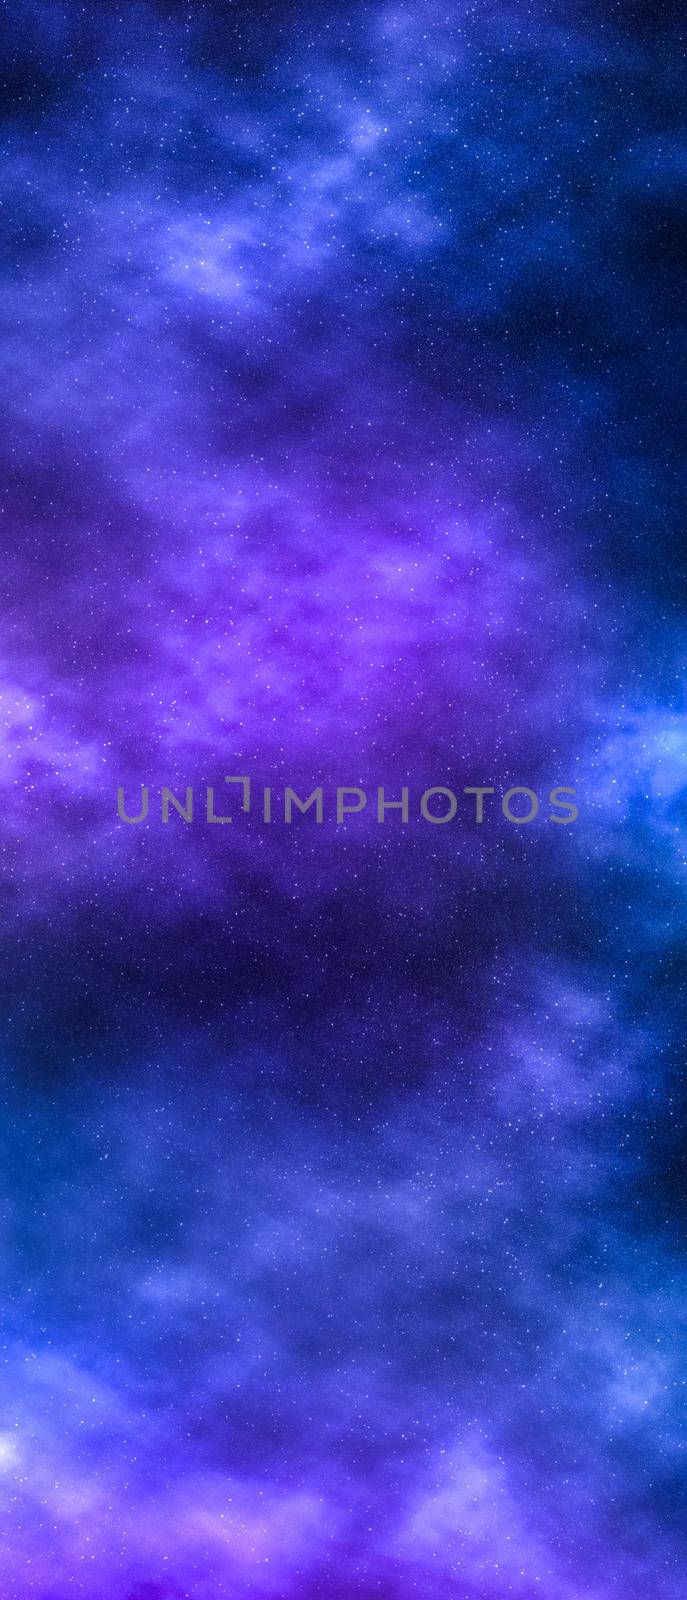 Night sky stars background, nebula clouds in cosmos by Anneleven